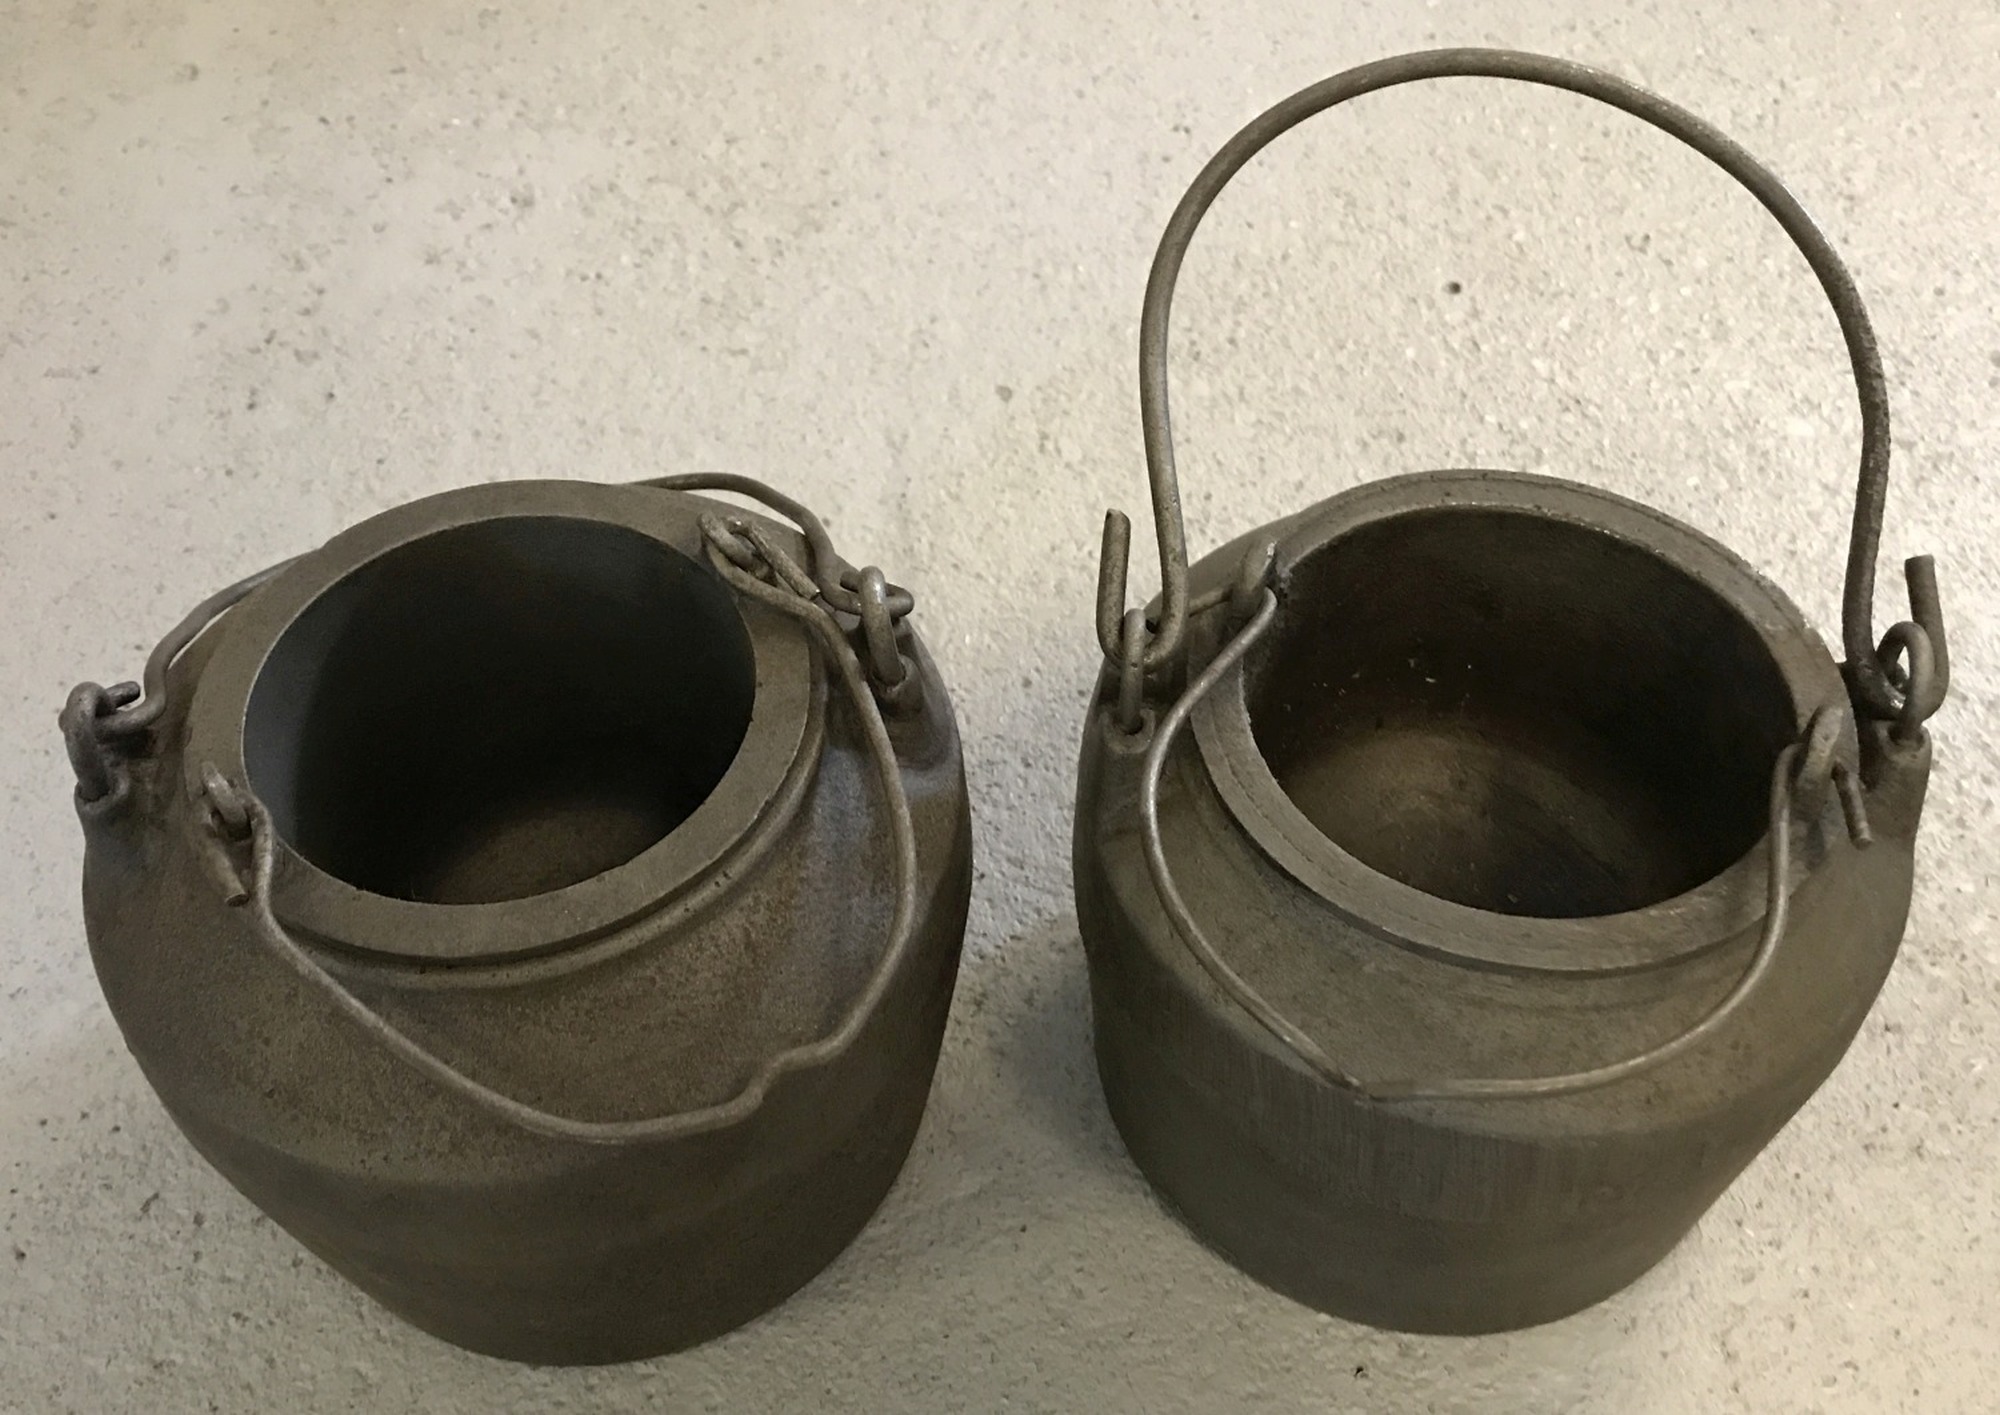 2 vintage 1pt glue pots by Kenrick, with removable liners.